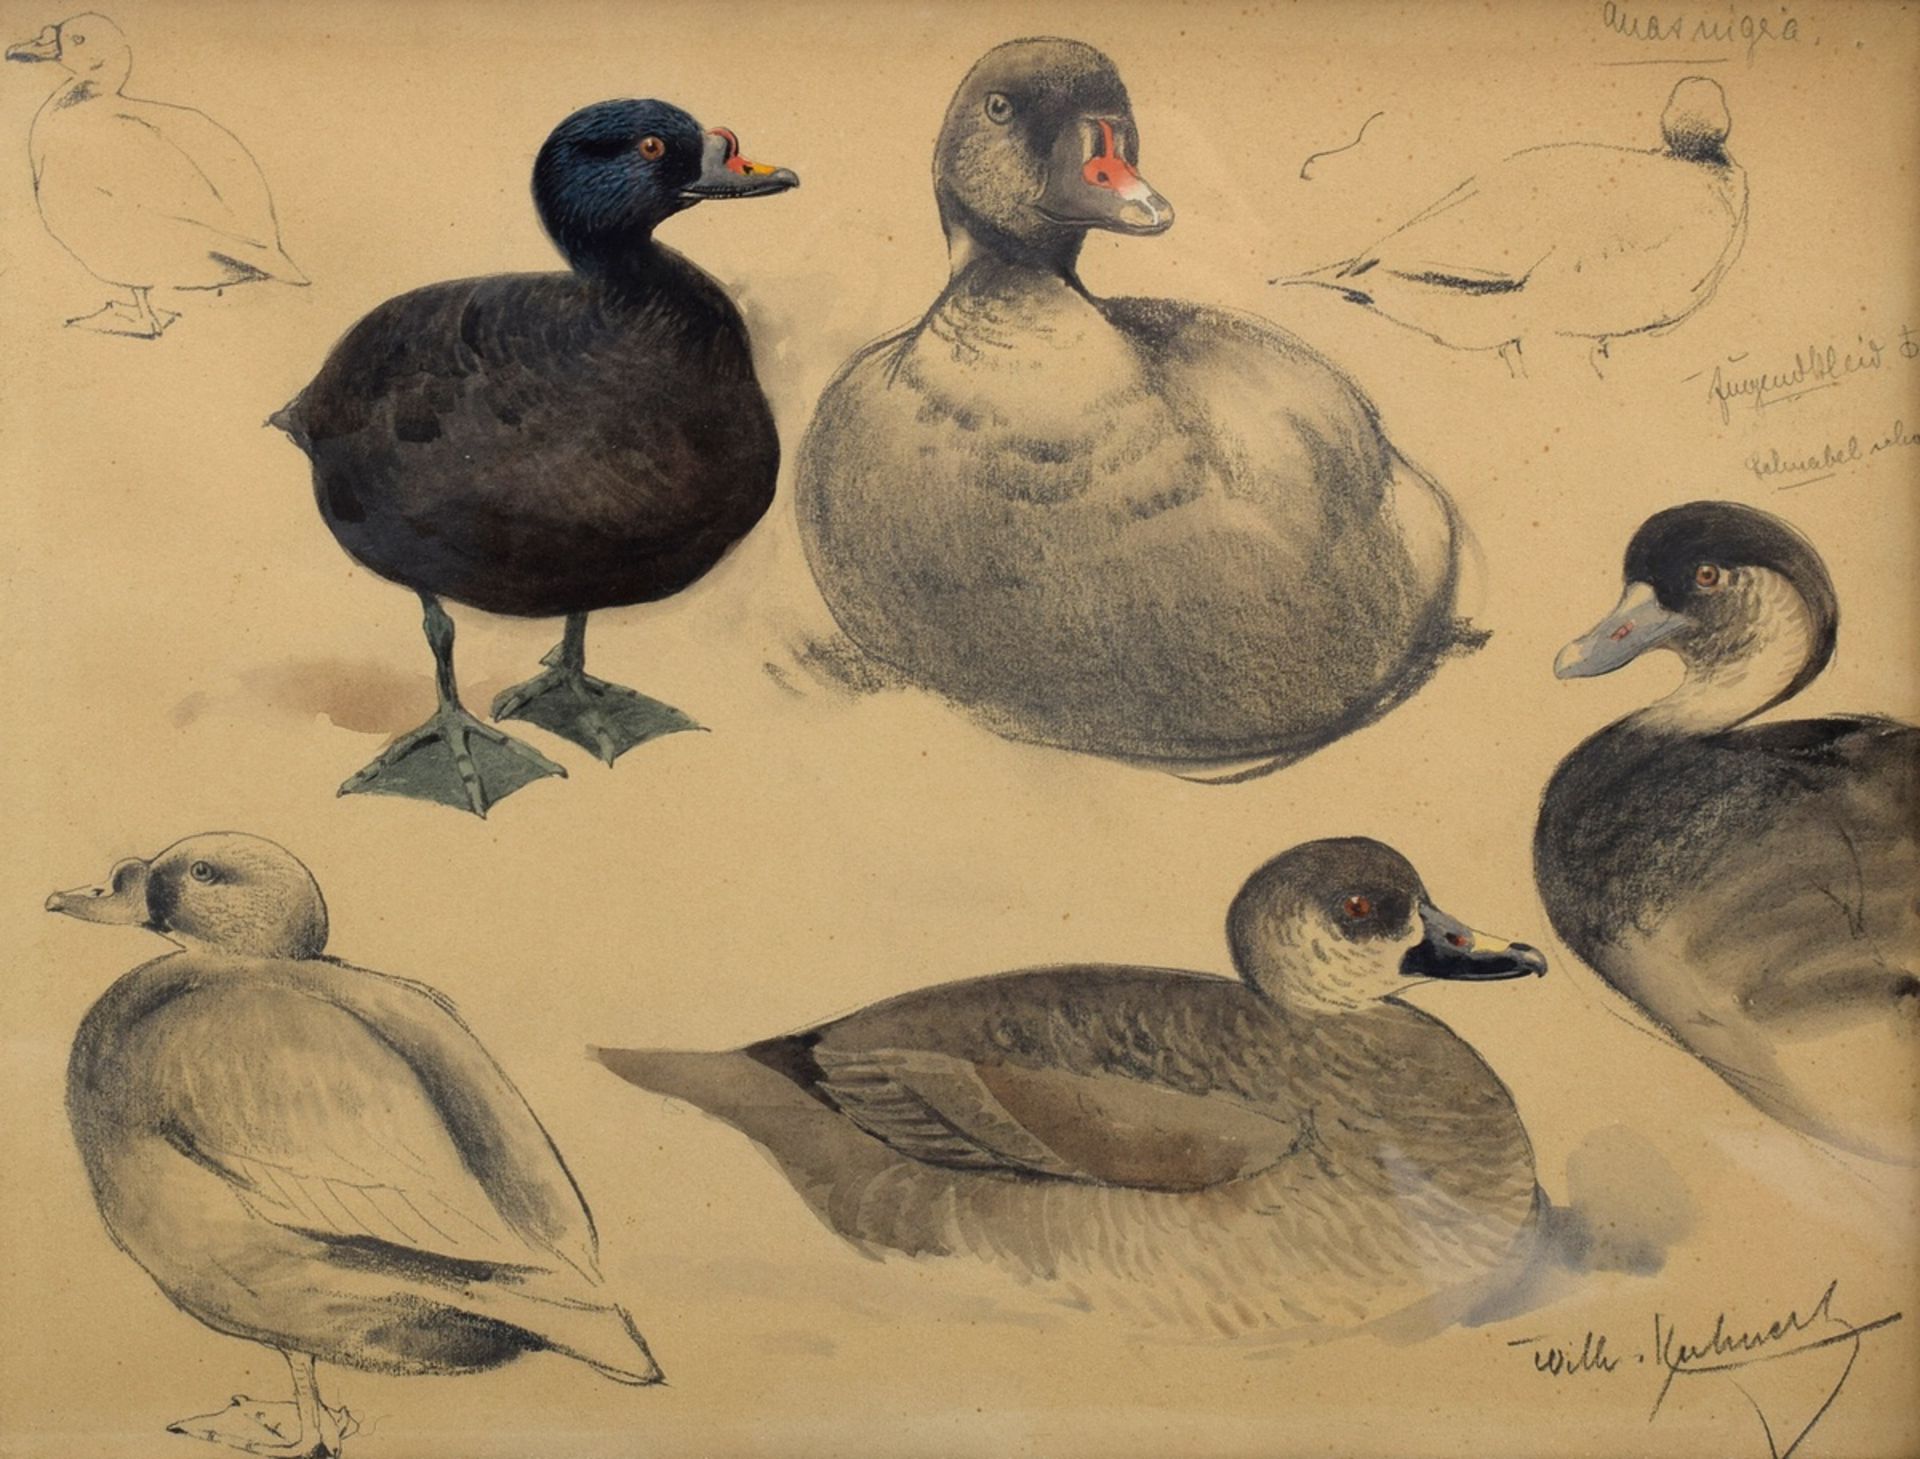 Kuhnert, Wilhelm (1865-1926) "Study sheet ducks", pencil/paper partly watercolored and inscr., b.r.